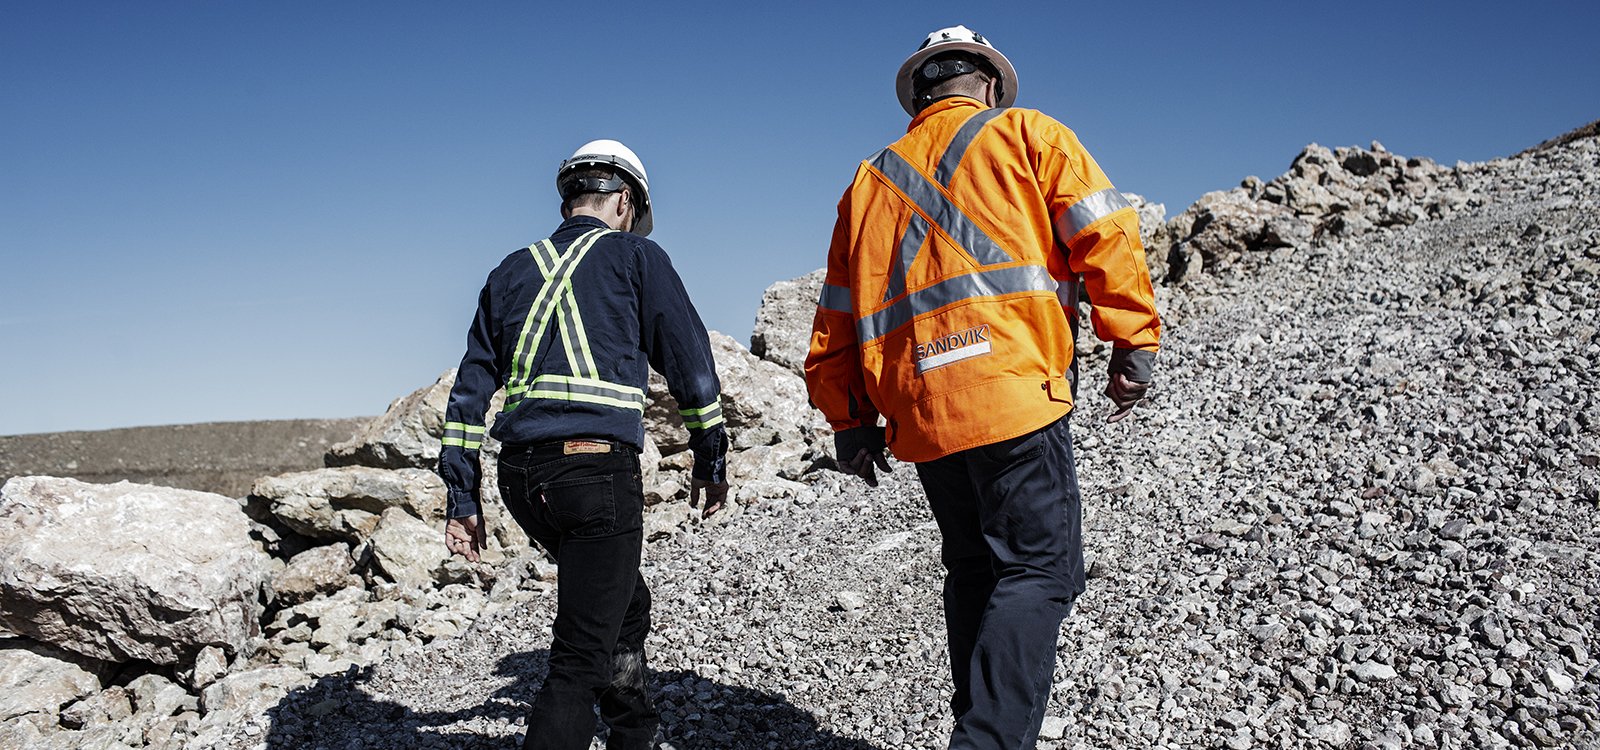 <p>Sandvik Mining and Rock Technology requires key suppliers and sub-contractors to follow its lead regarding sustainability targets.</p>
